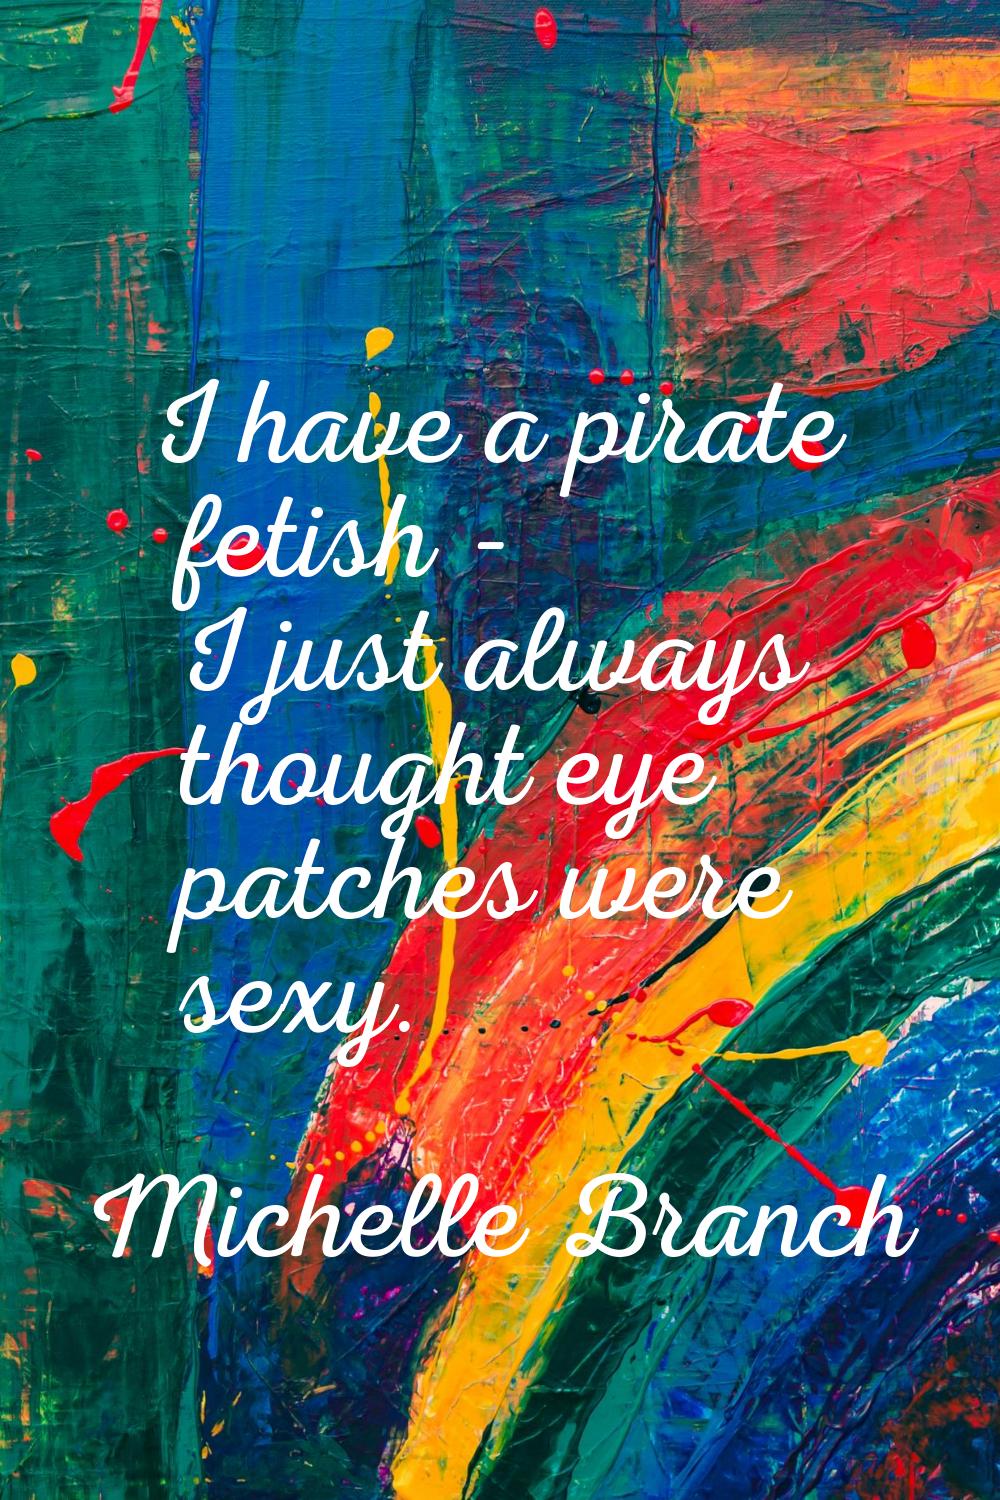 I have a pirate fetish - I just always thought eye patches were sexy.